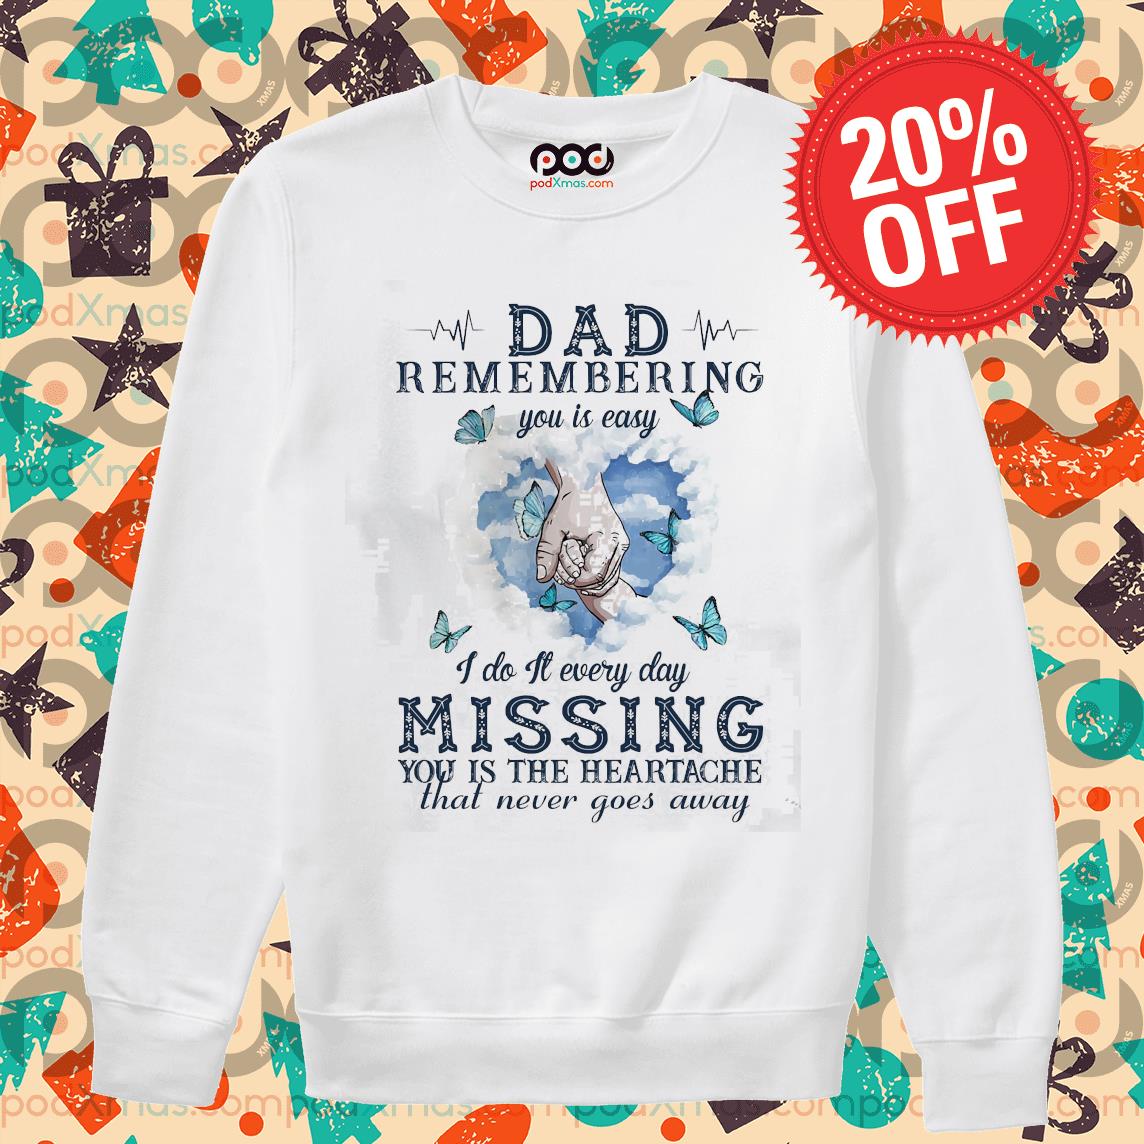 https://images.podxmas.com/wp-content/uploads/2021/02/dad-remembering-you-is-easy-i-do-it-every-day-missing-you-is-the-heartache-that-never-goes-away-hoodie-Sweater-PODxmas-trang.jpg